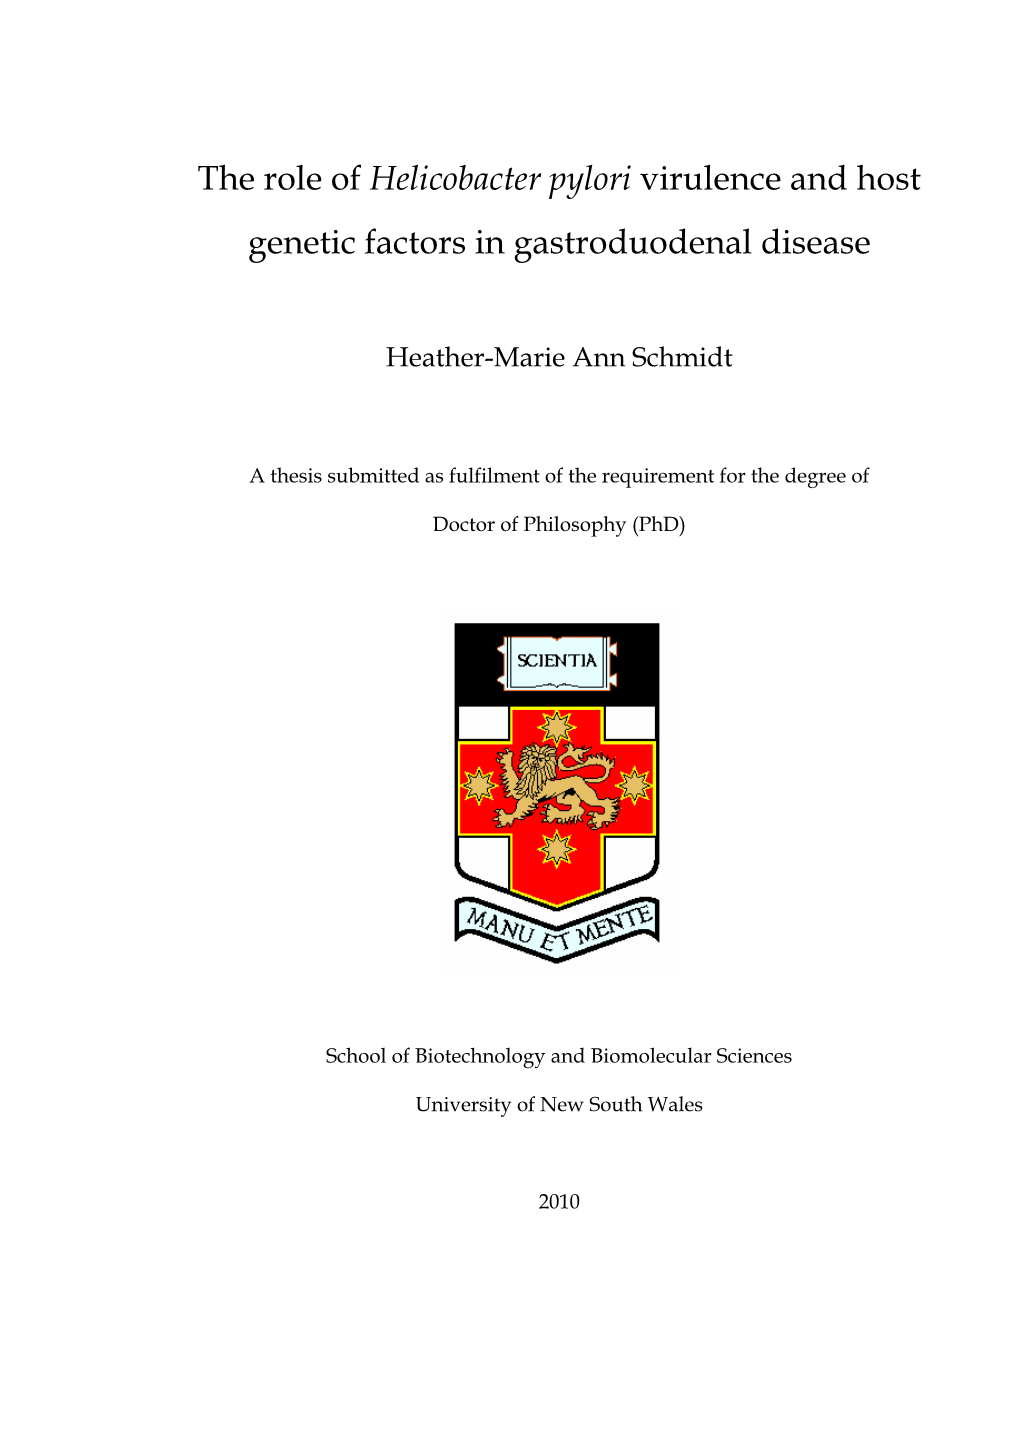 The Role of Helicobacter Pylori Virulence and Host Genetic Factors in Gastroduodenal Disease